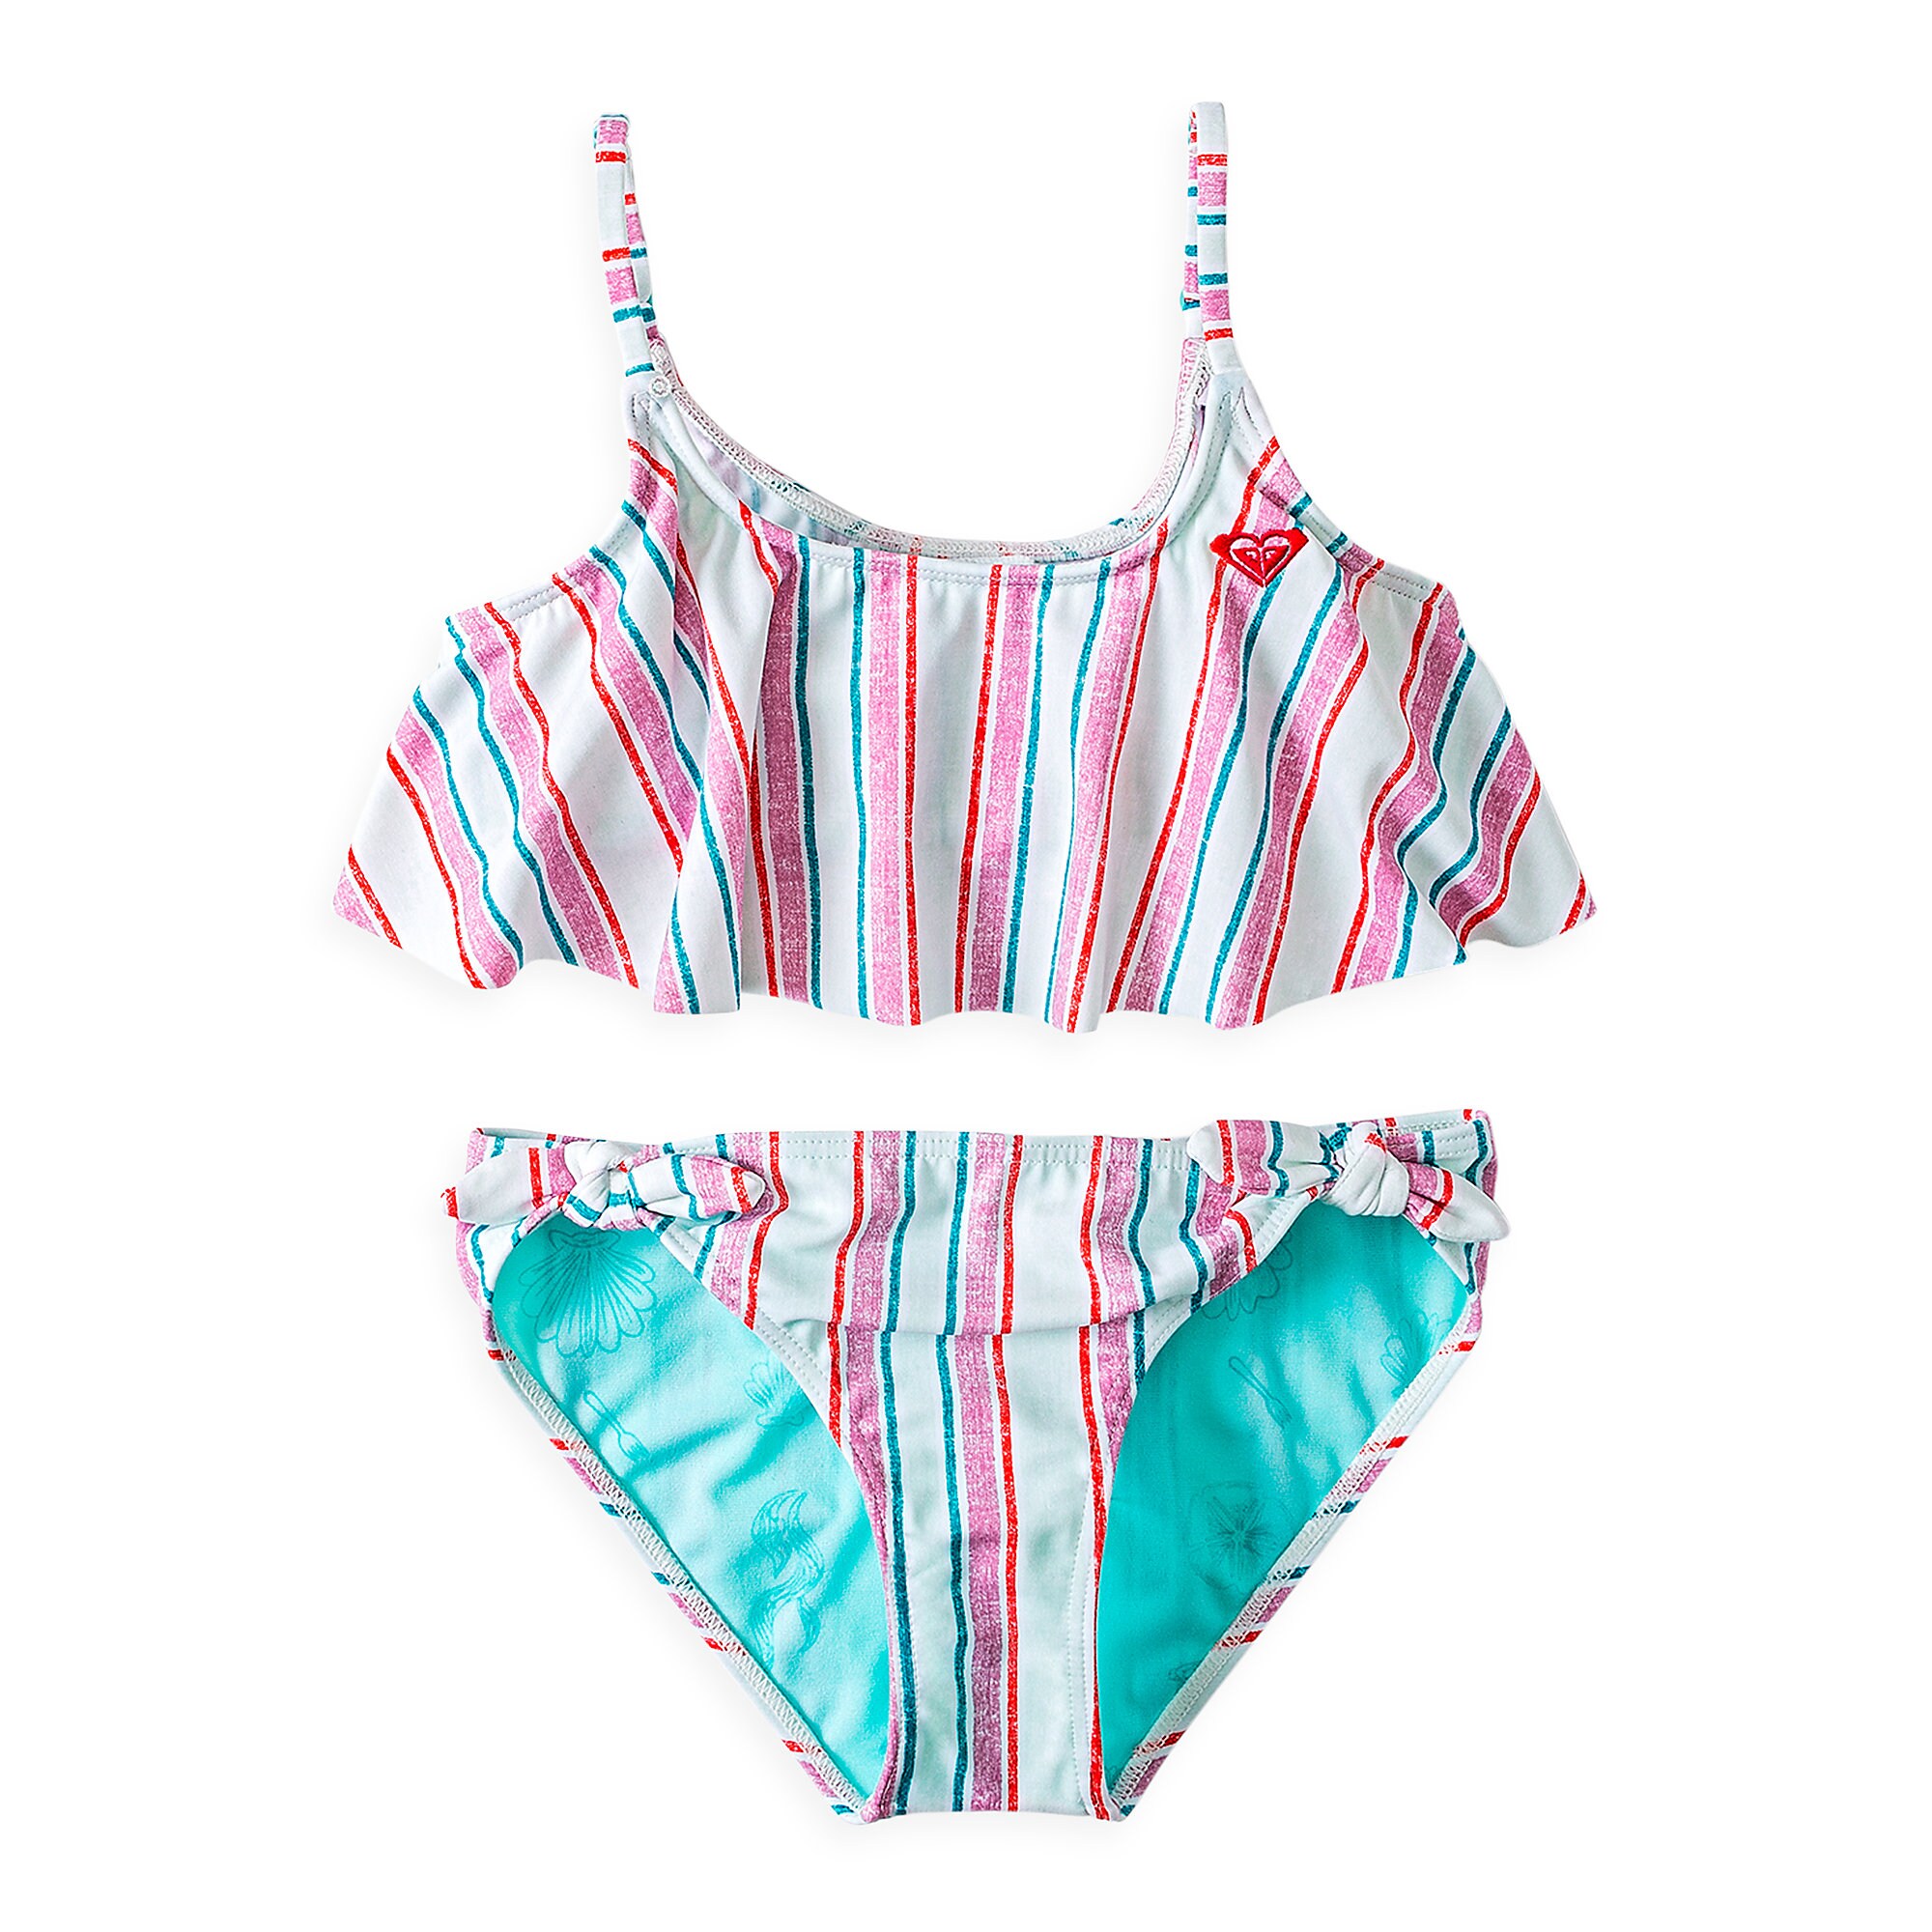 The Little Mermaid Striped Swimsuit for Girls by ROXY Girl